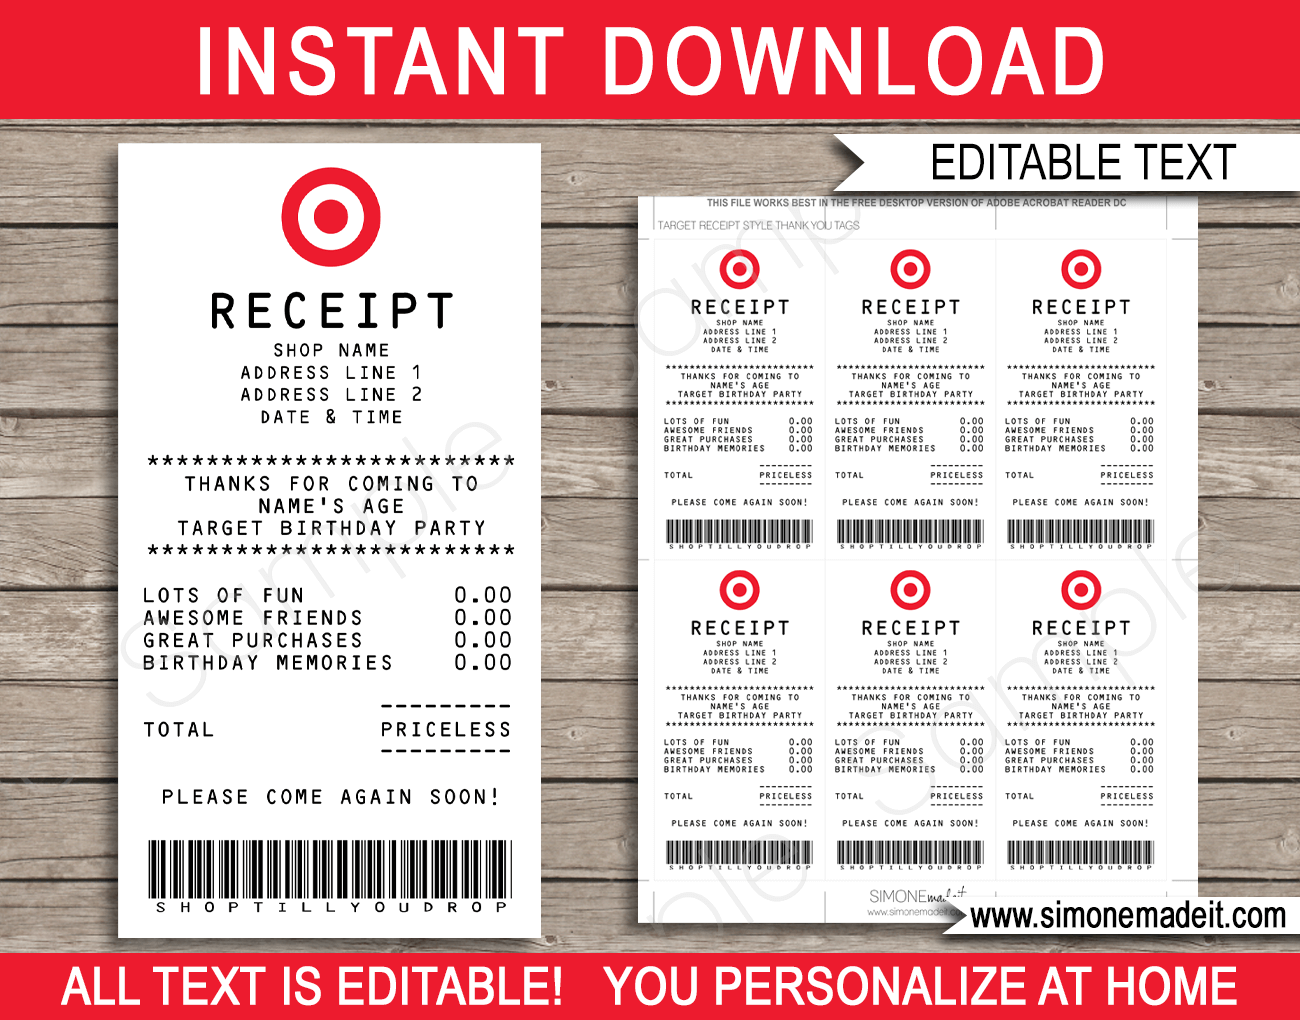 Printable Target Party Receipt Favor Tags Template | Shopping Birthday Party Theme Thank You Tags | Mall Scavenger Hunt | Credit Card Receipt | DIY Editable Text | Instant Download via simonemadeit.com